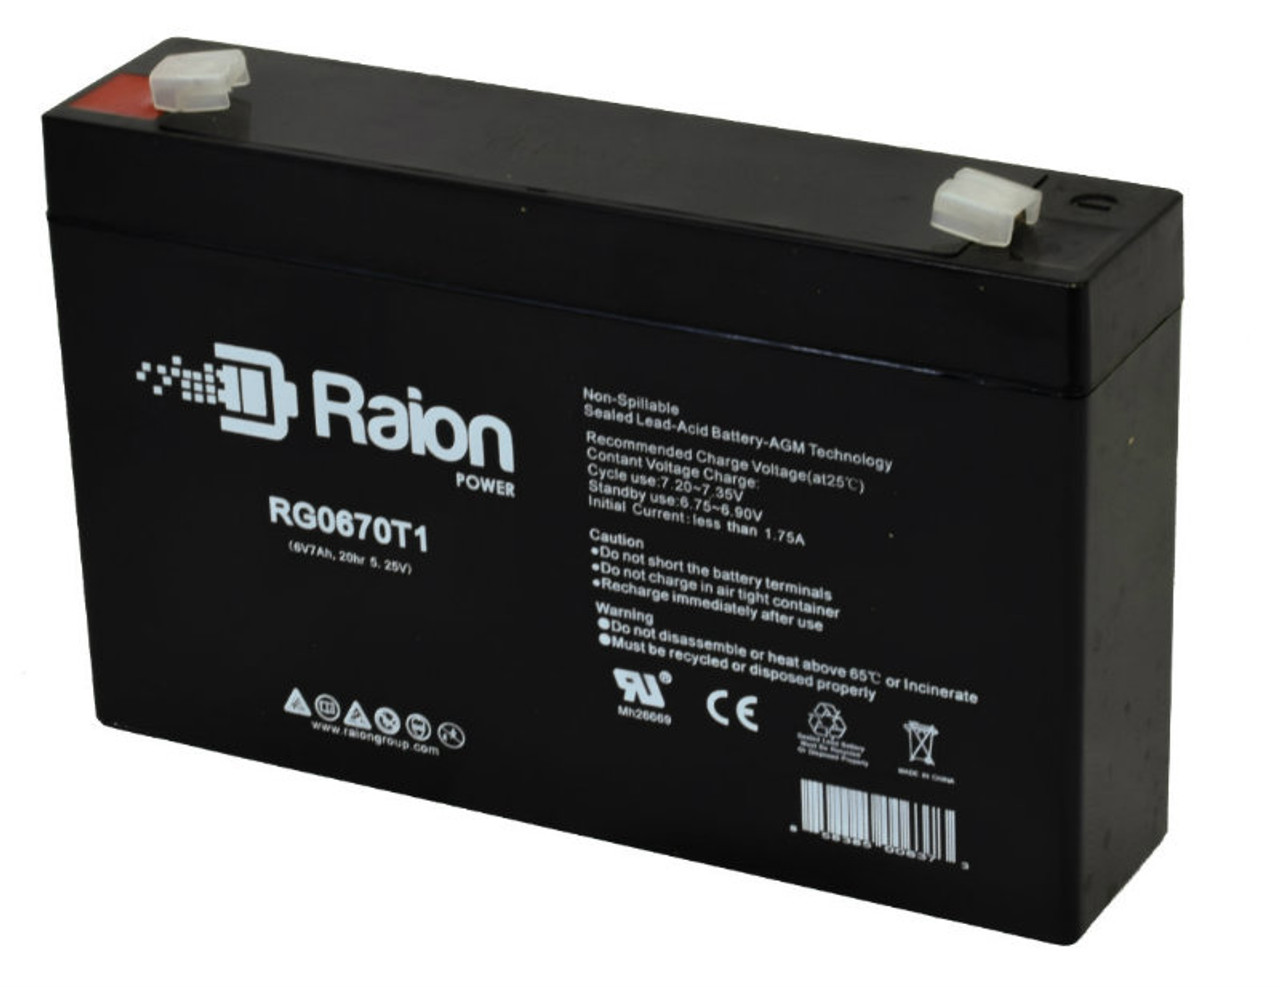 Raion Power RG0670T1 Replacement Battery for Sonnenschein PB100 OEM Battery